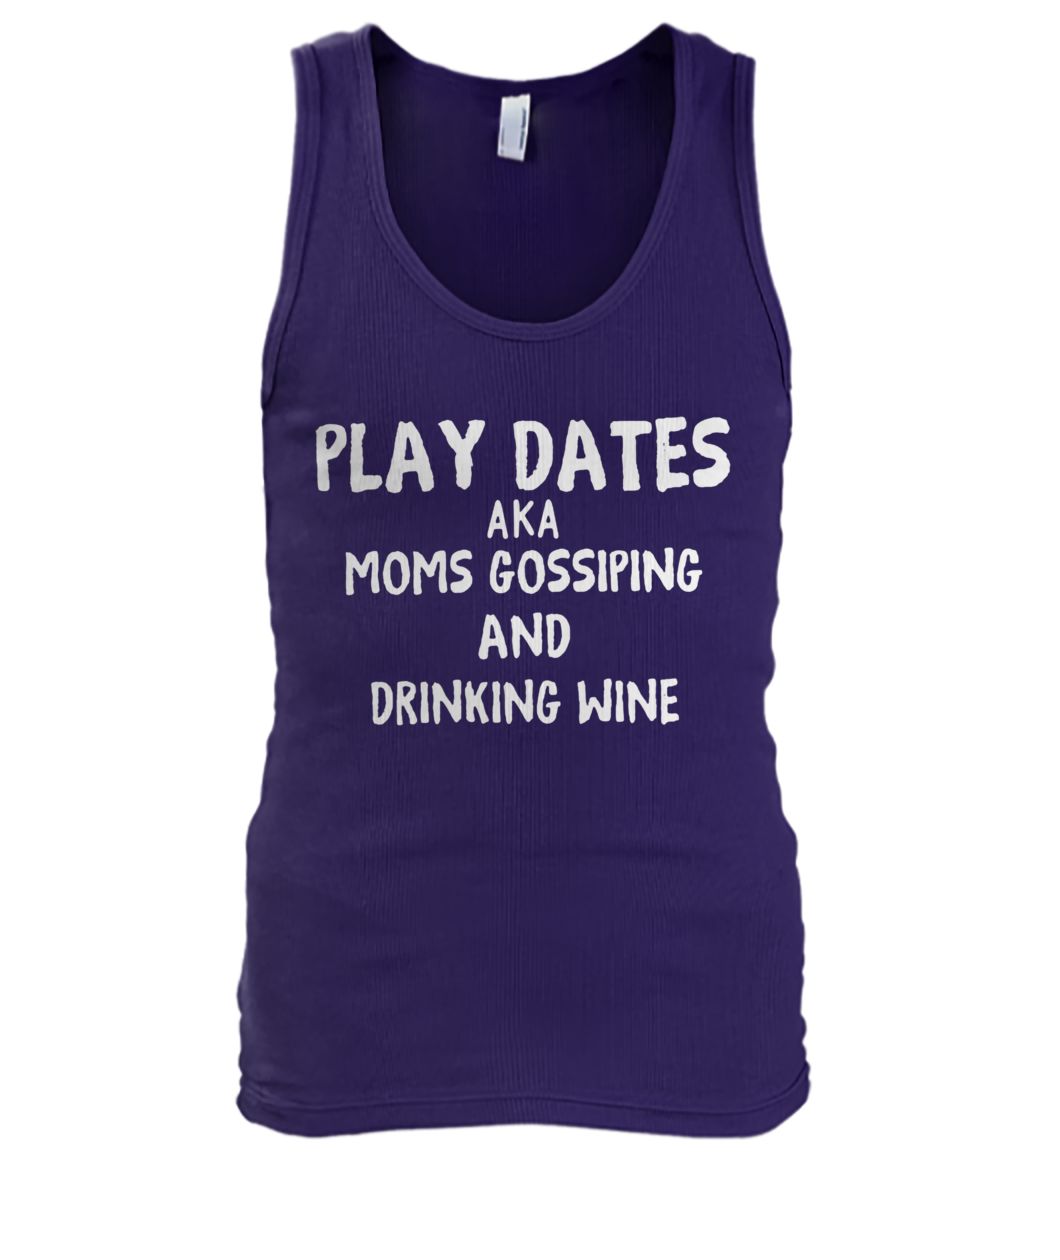 Play dates aka moms gossiping and drinking wine men's tank top